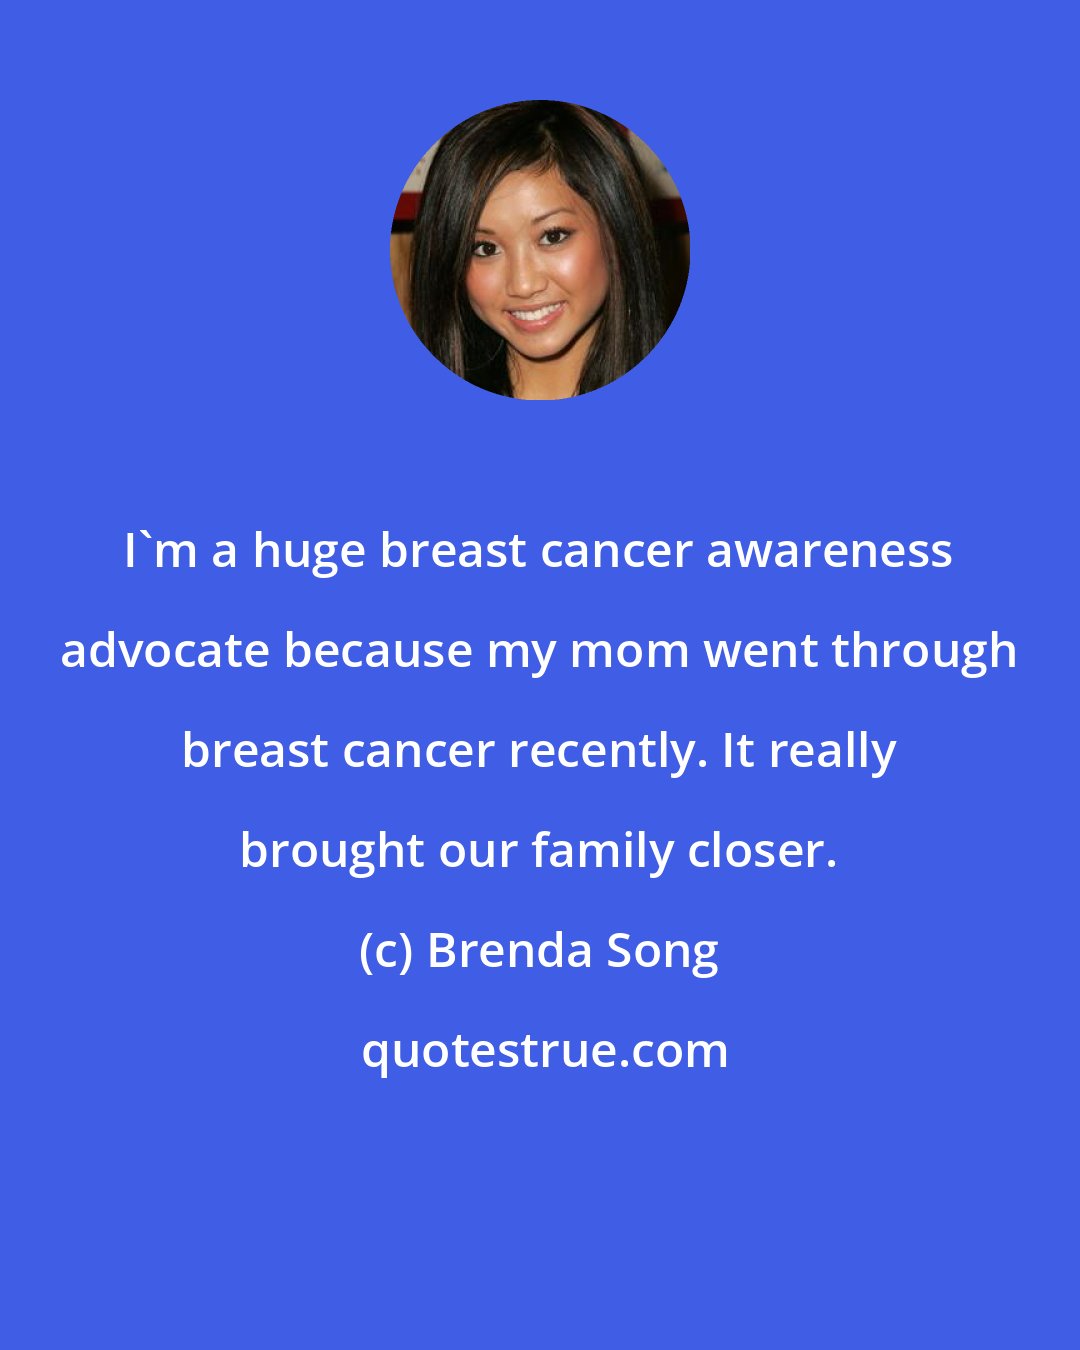 Brenda Song: I'm a huge breast cancer awareness advocate because my mom went through breast cancer recently. It really brought our family closer.